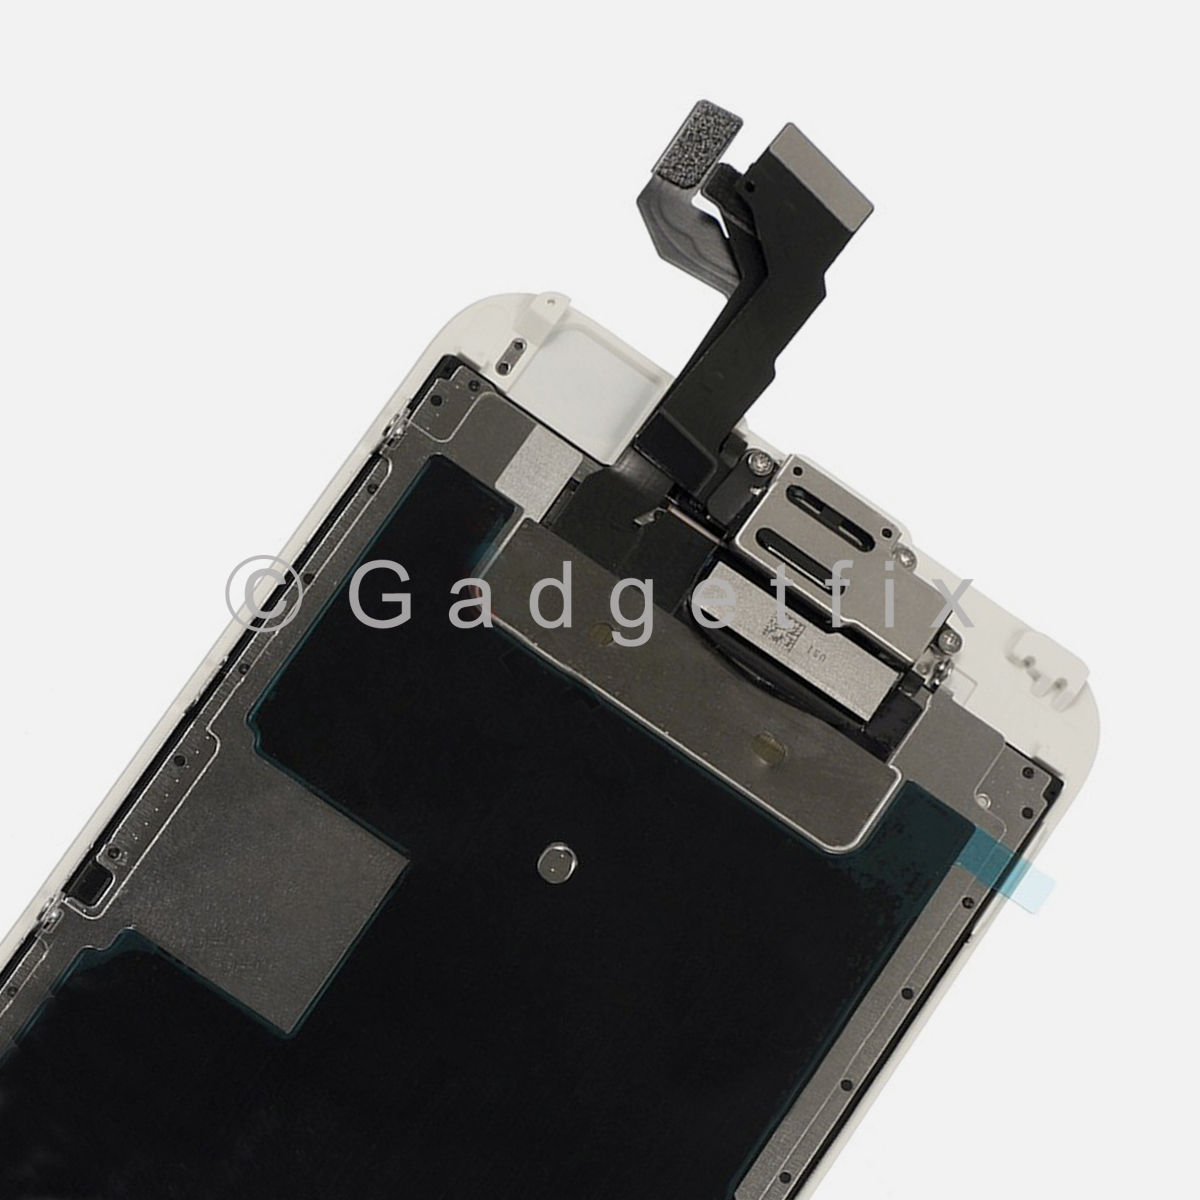 LCD Display Touch Screen Digitizer Assembly + Small Parts for Gold Iphone 6S